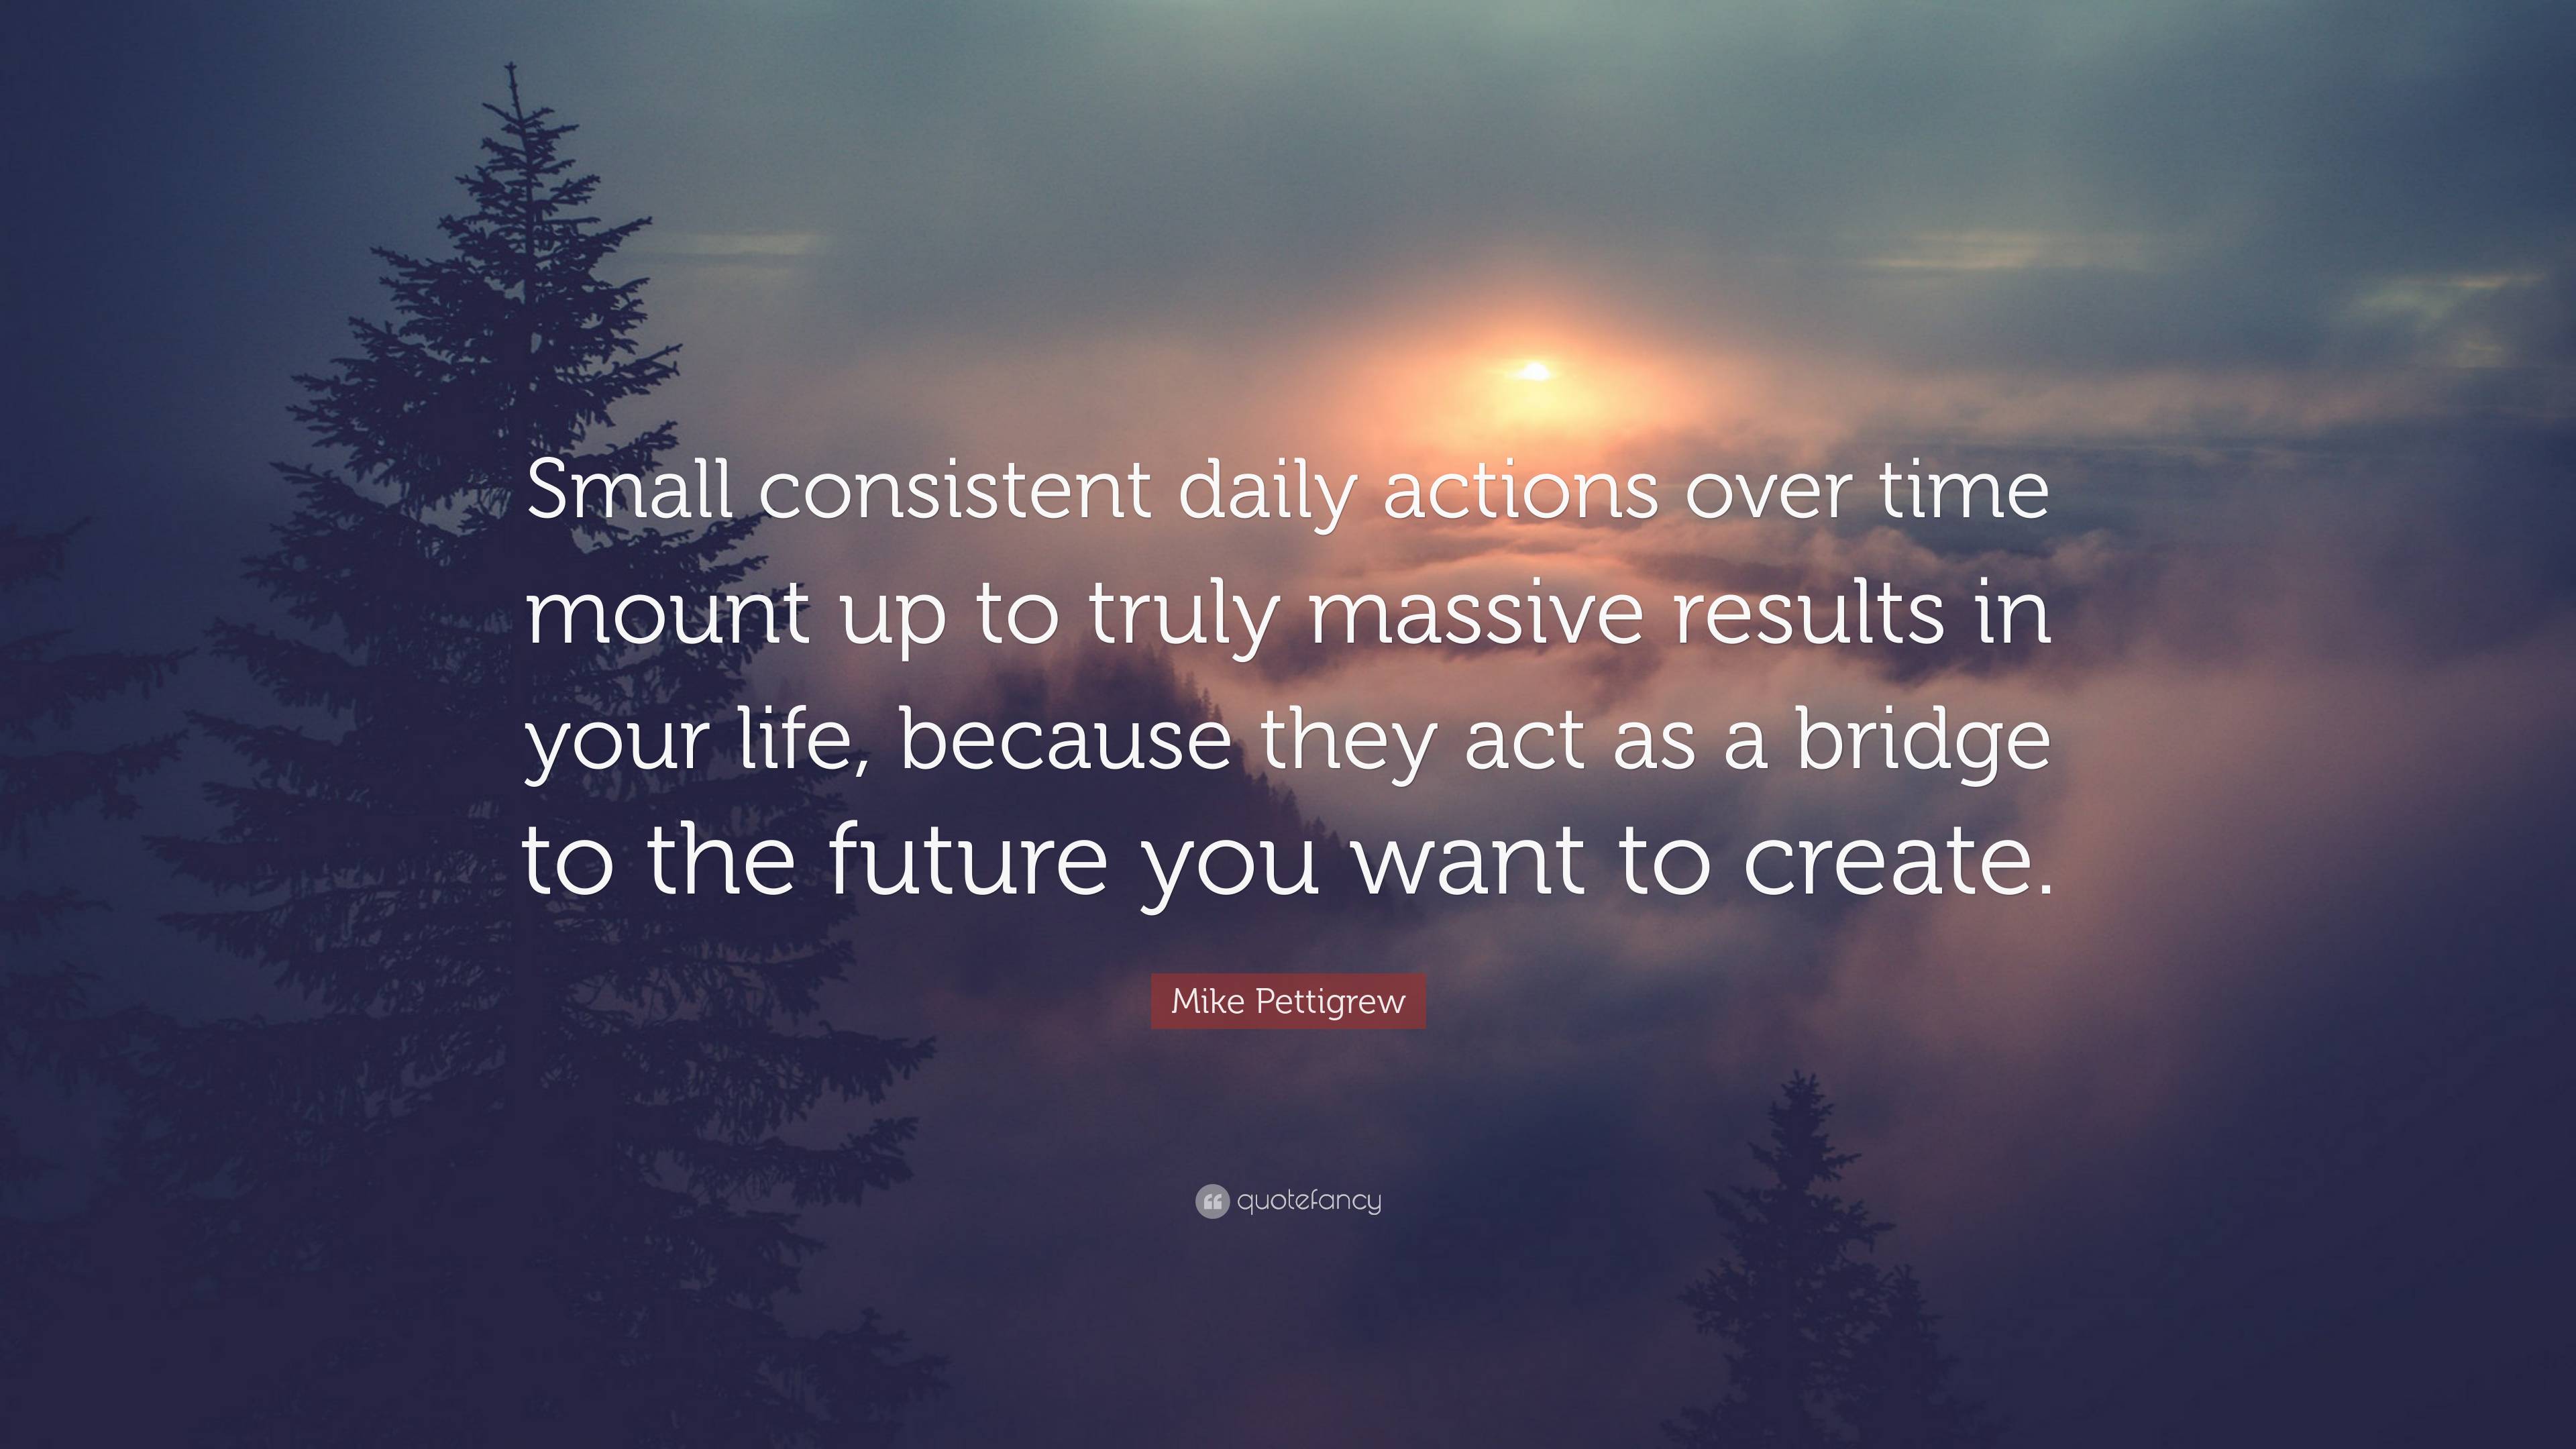 Mike Pettigrew Quote: “Small consistent daily actions over time mount ...